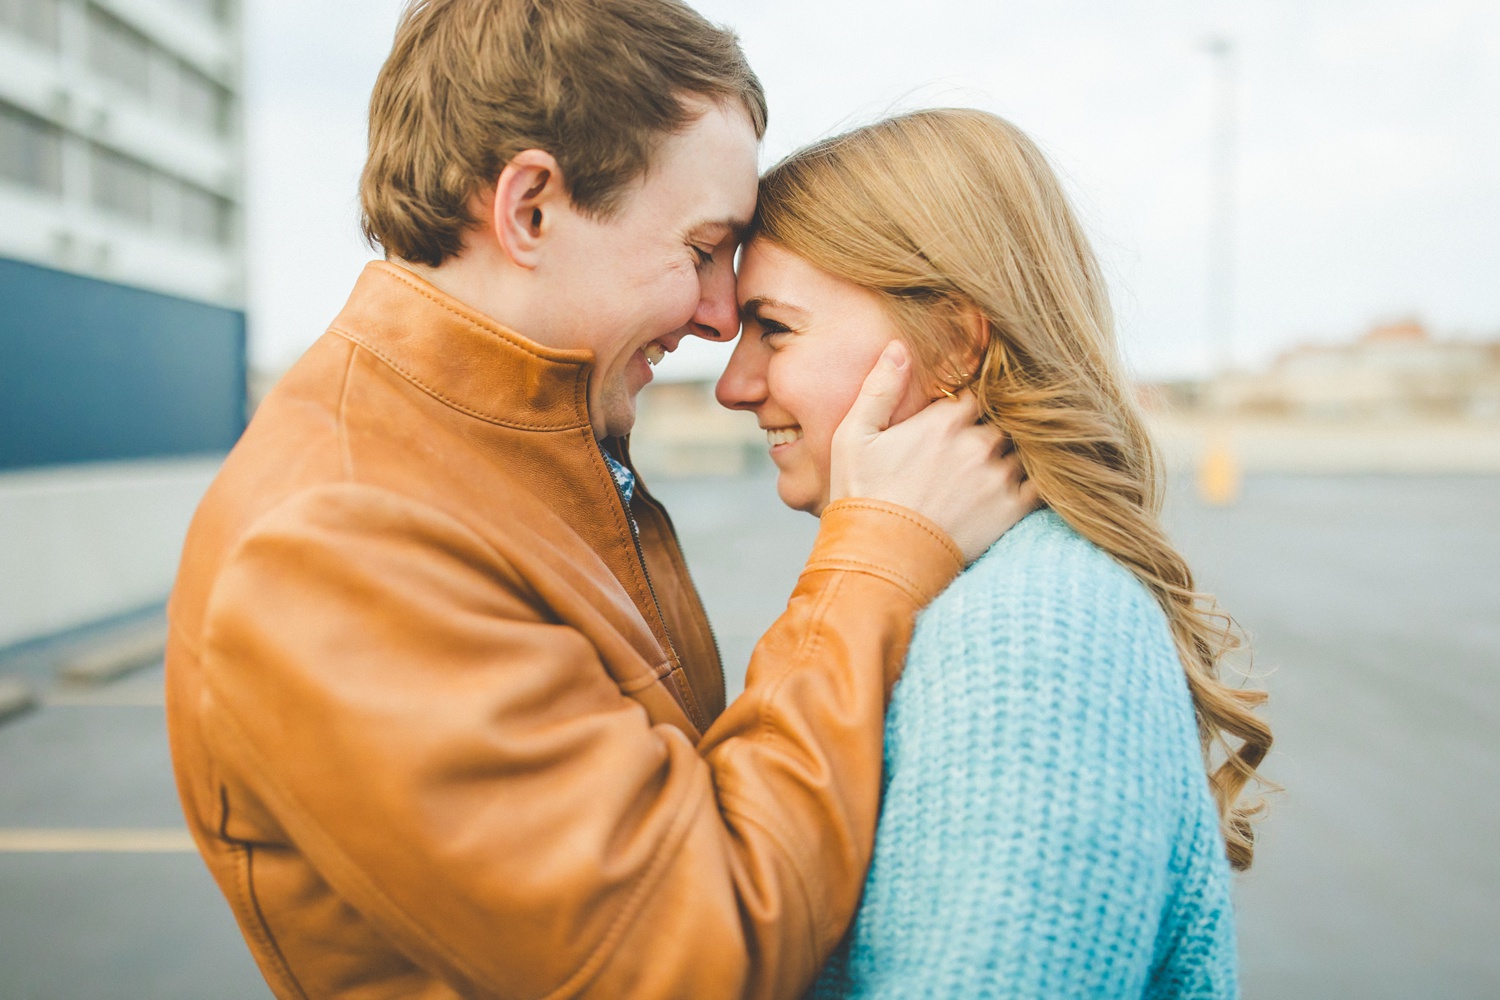 Downtown Engagement Photos in Small Town, Lissa Chandler Photography 